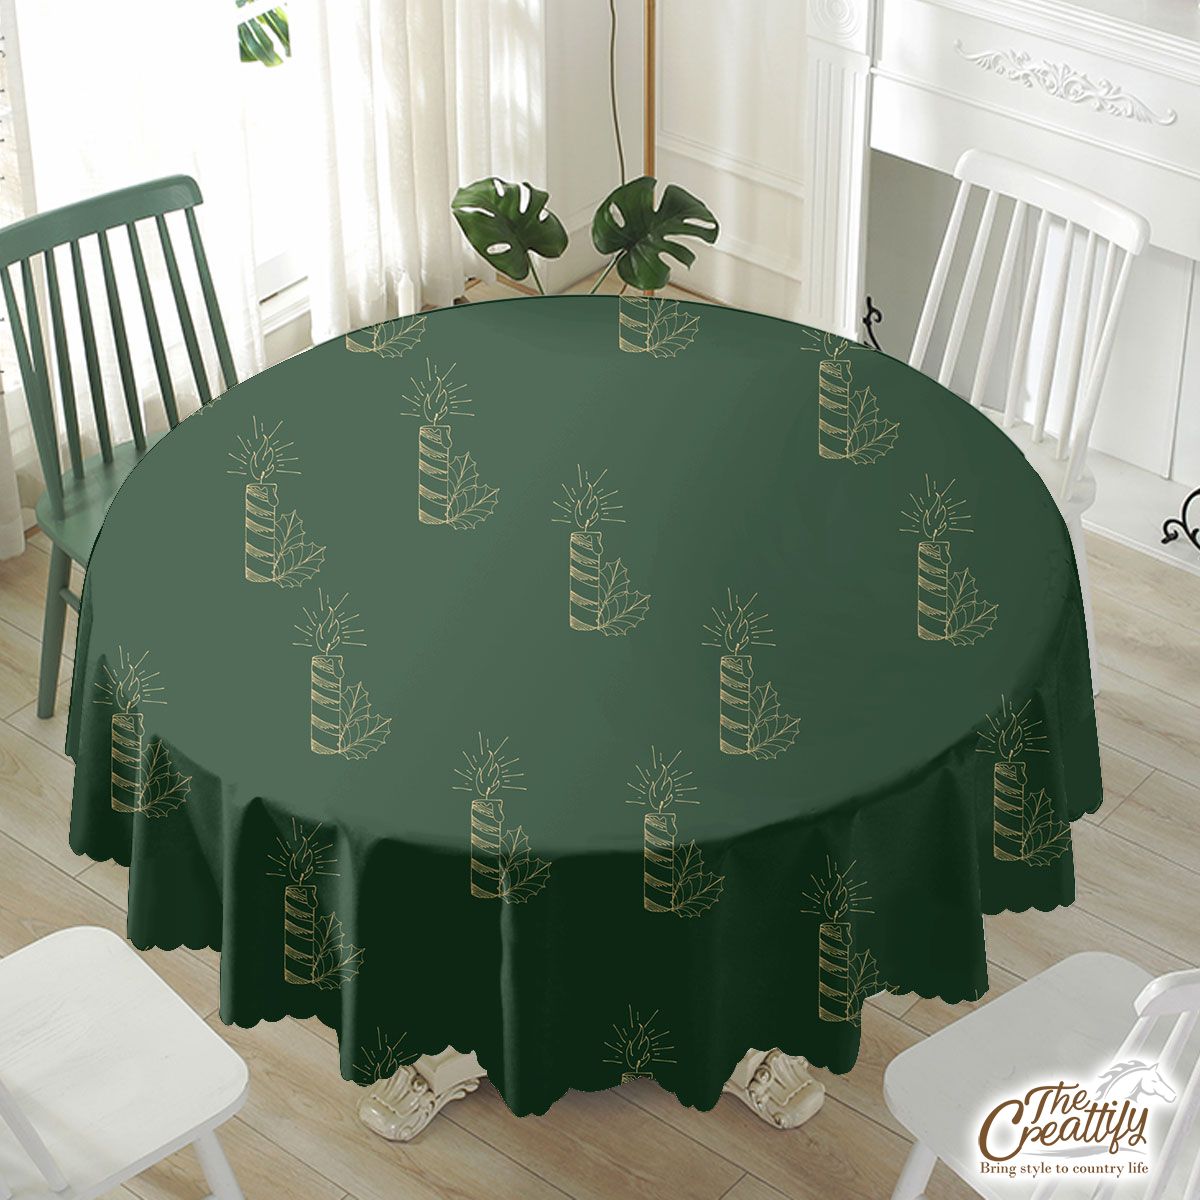 Gold And Green Christmas Candle With Holly Leaf Waterproof Tablecloth